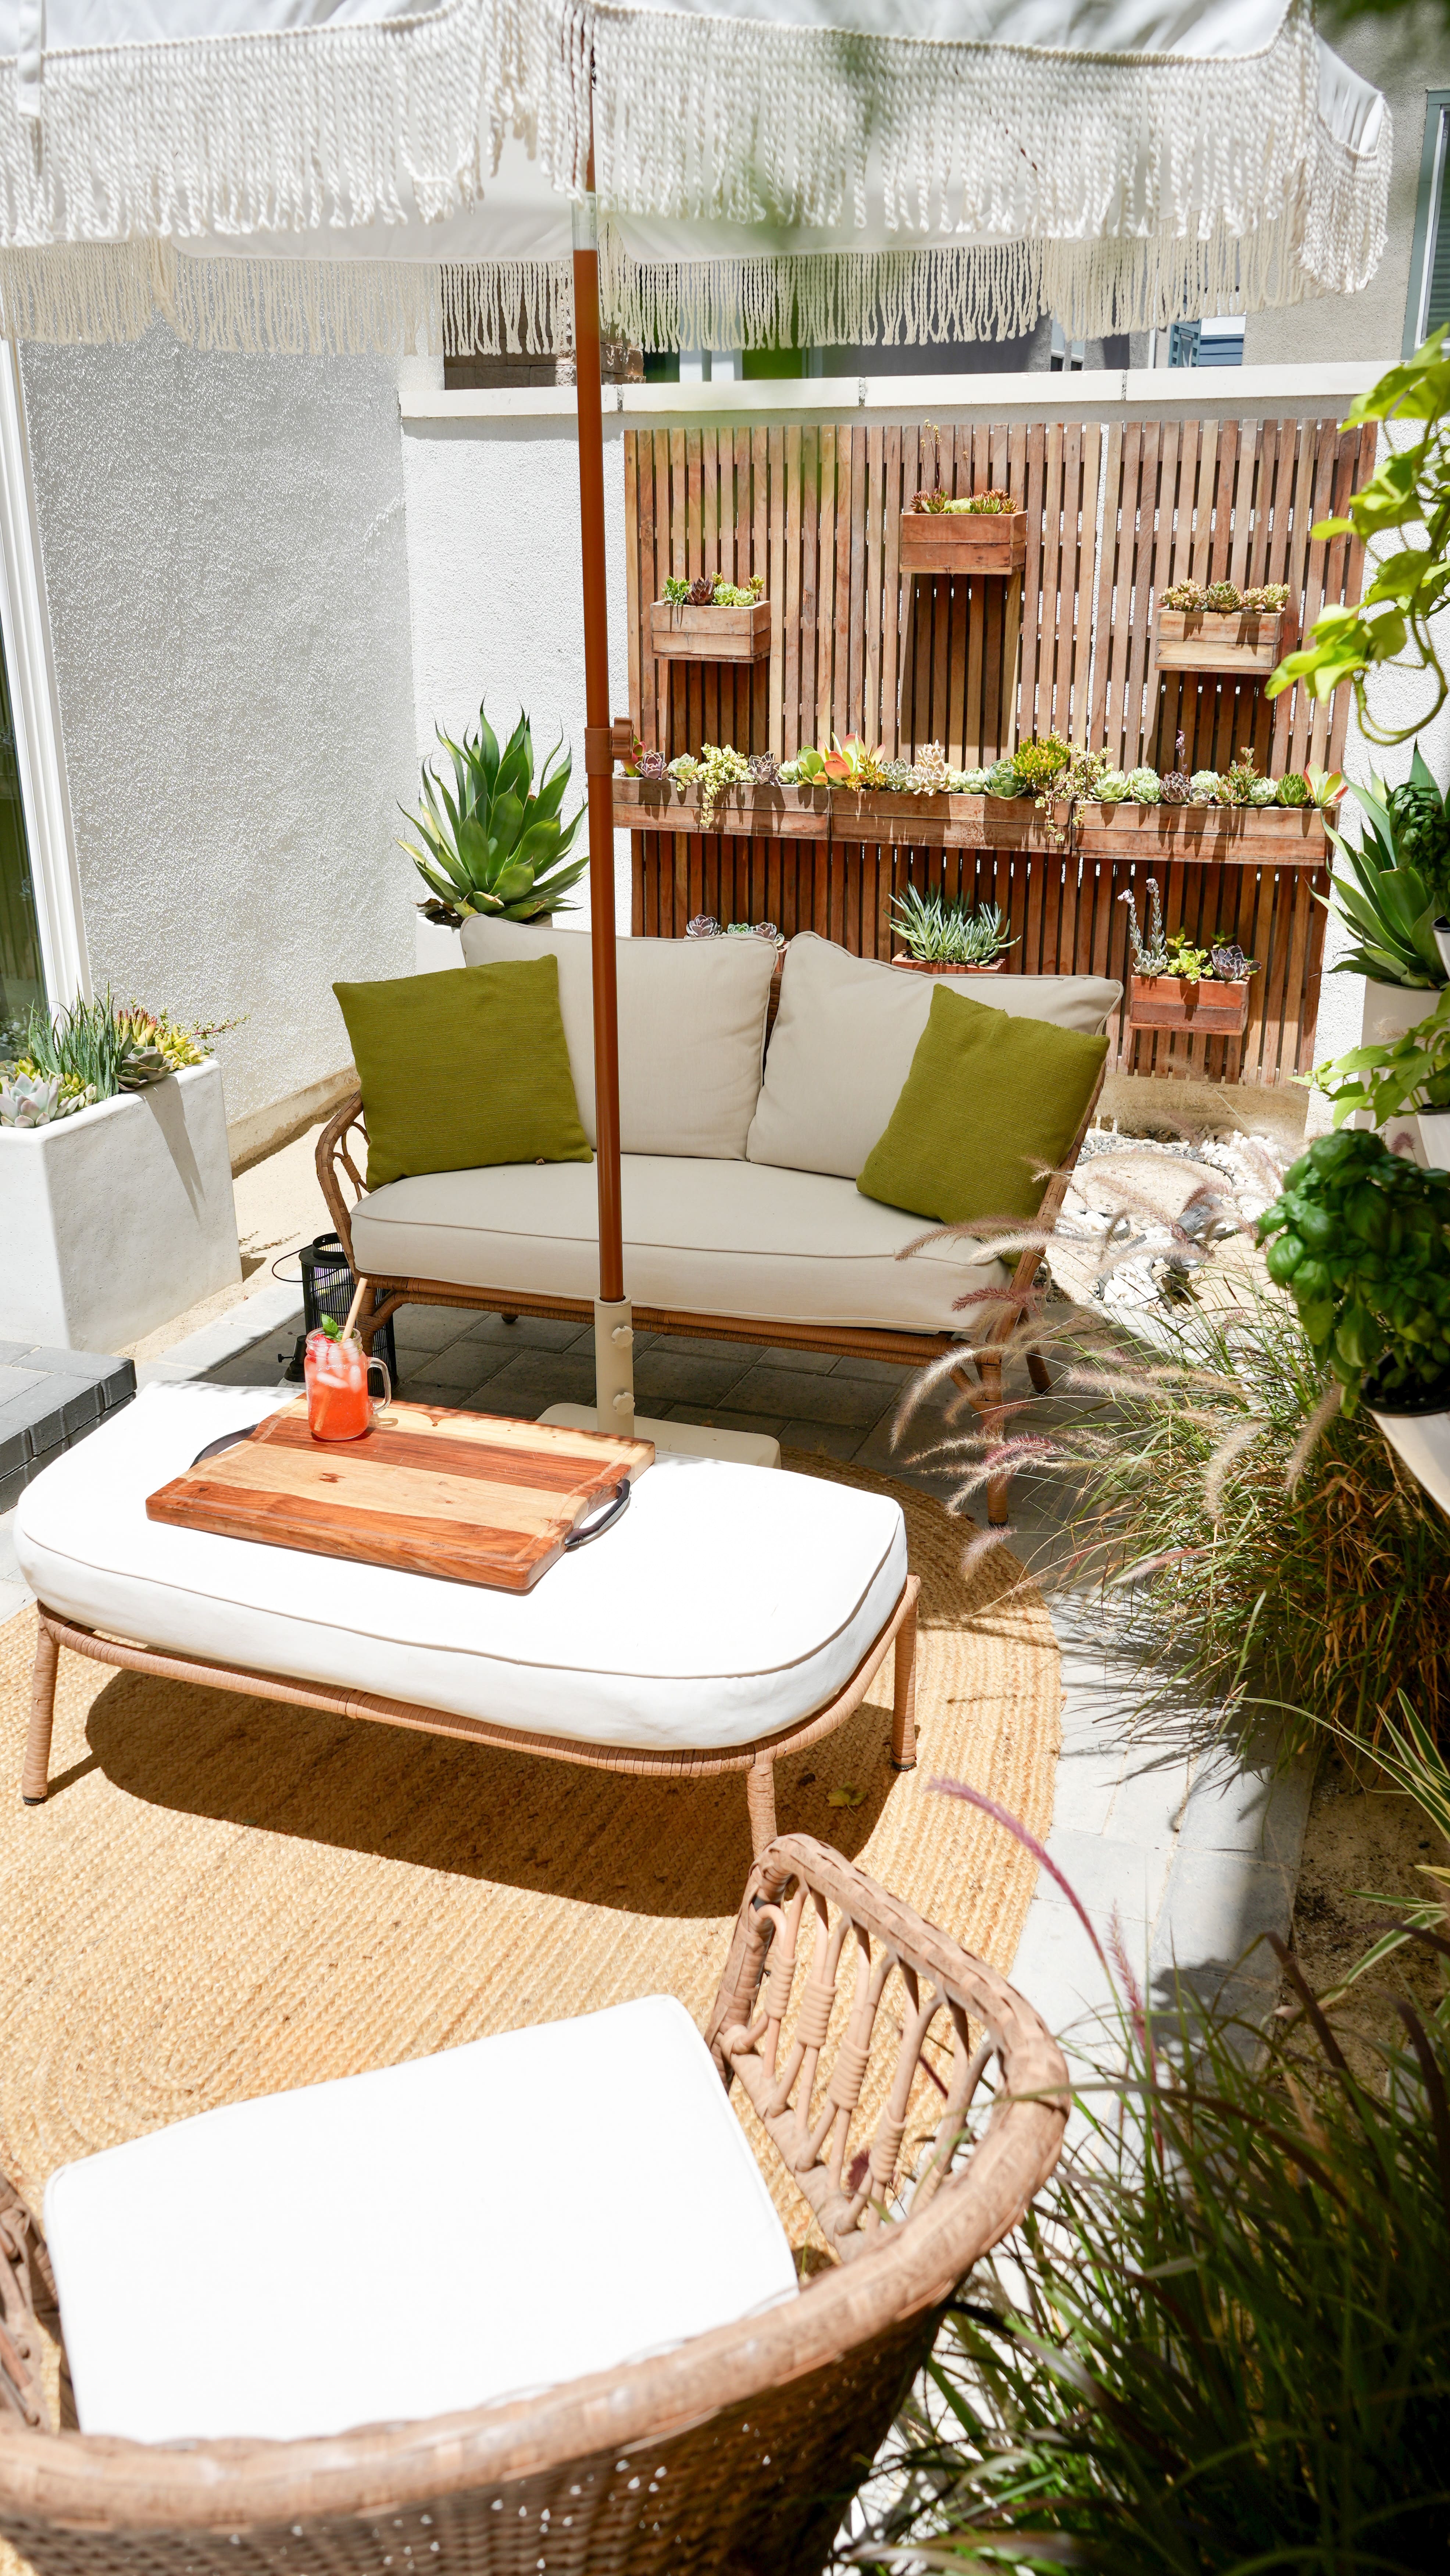 Side yard patio featuring wall planters with green plants, white patio furniture with green pillows and a white patio umbrella.